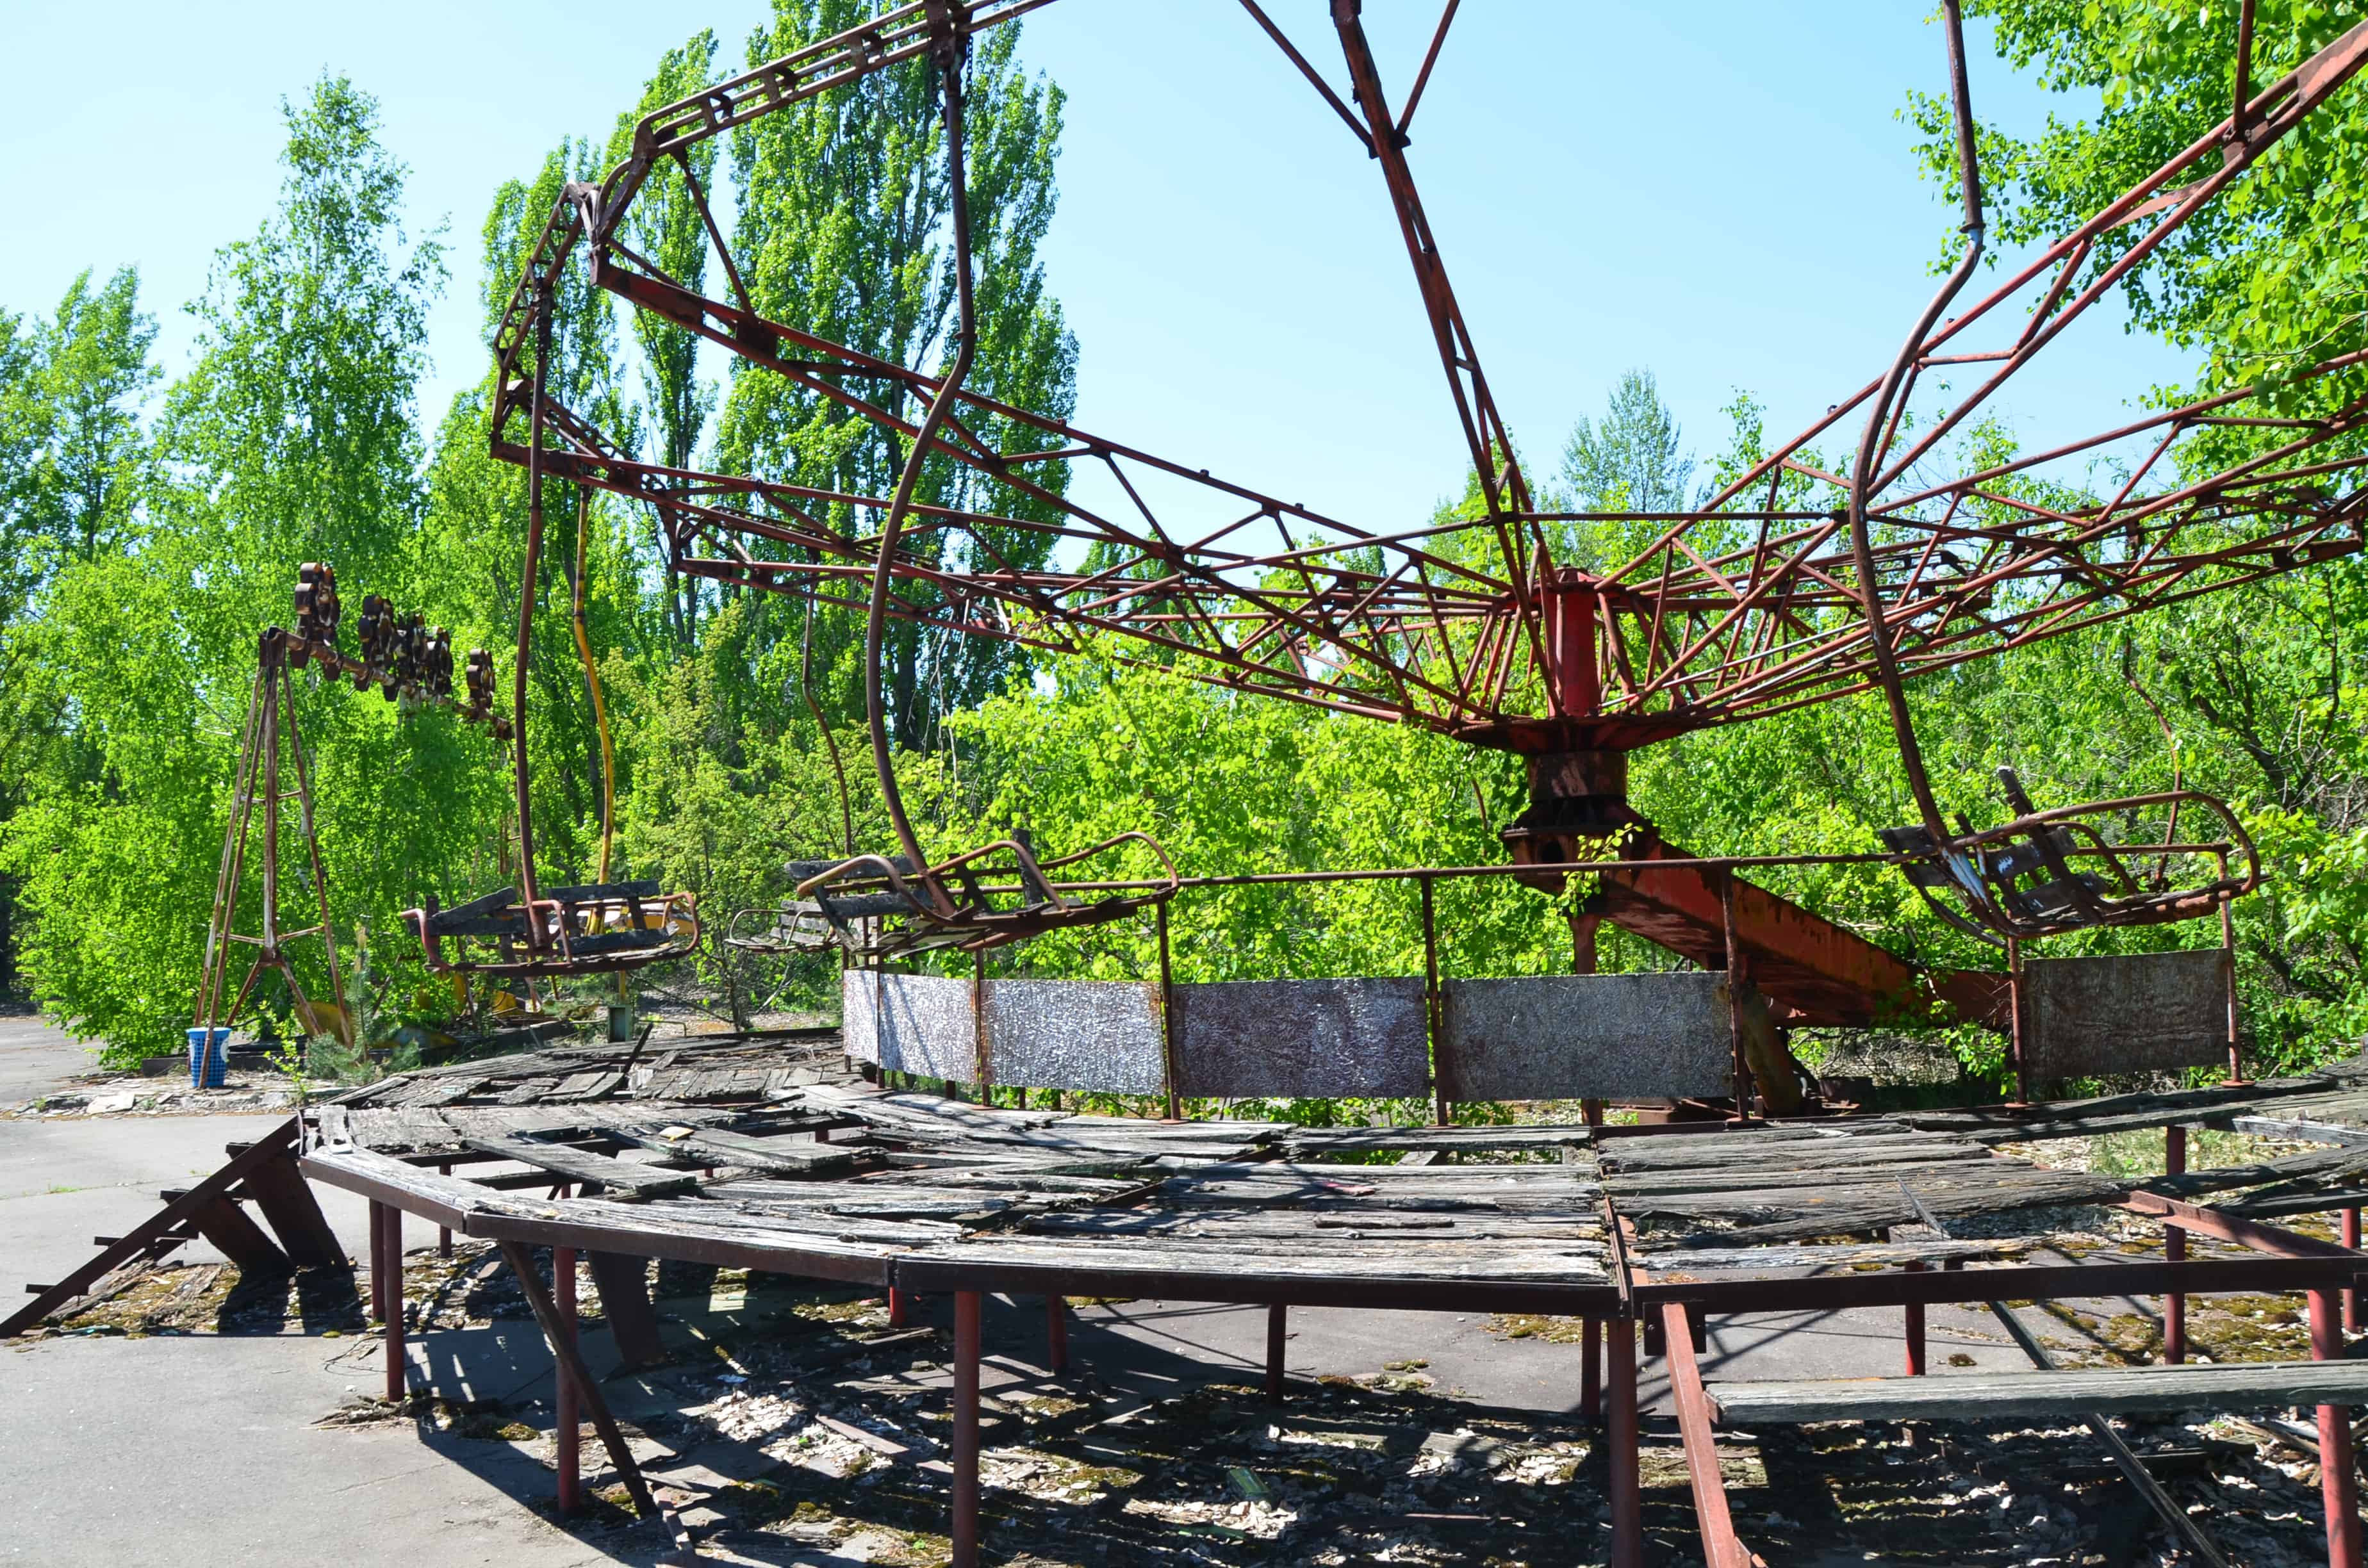 Chair swing at the amusement park in Pripyat, Chernobyl Exclusion Zone, Ukraine